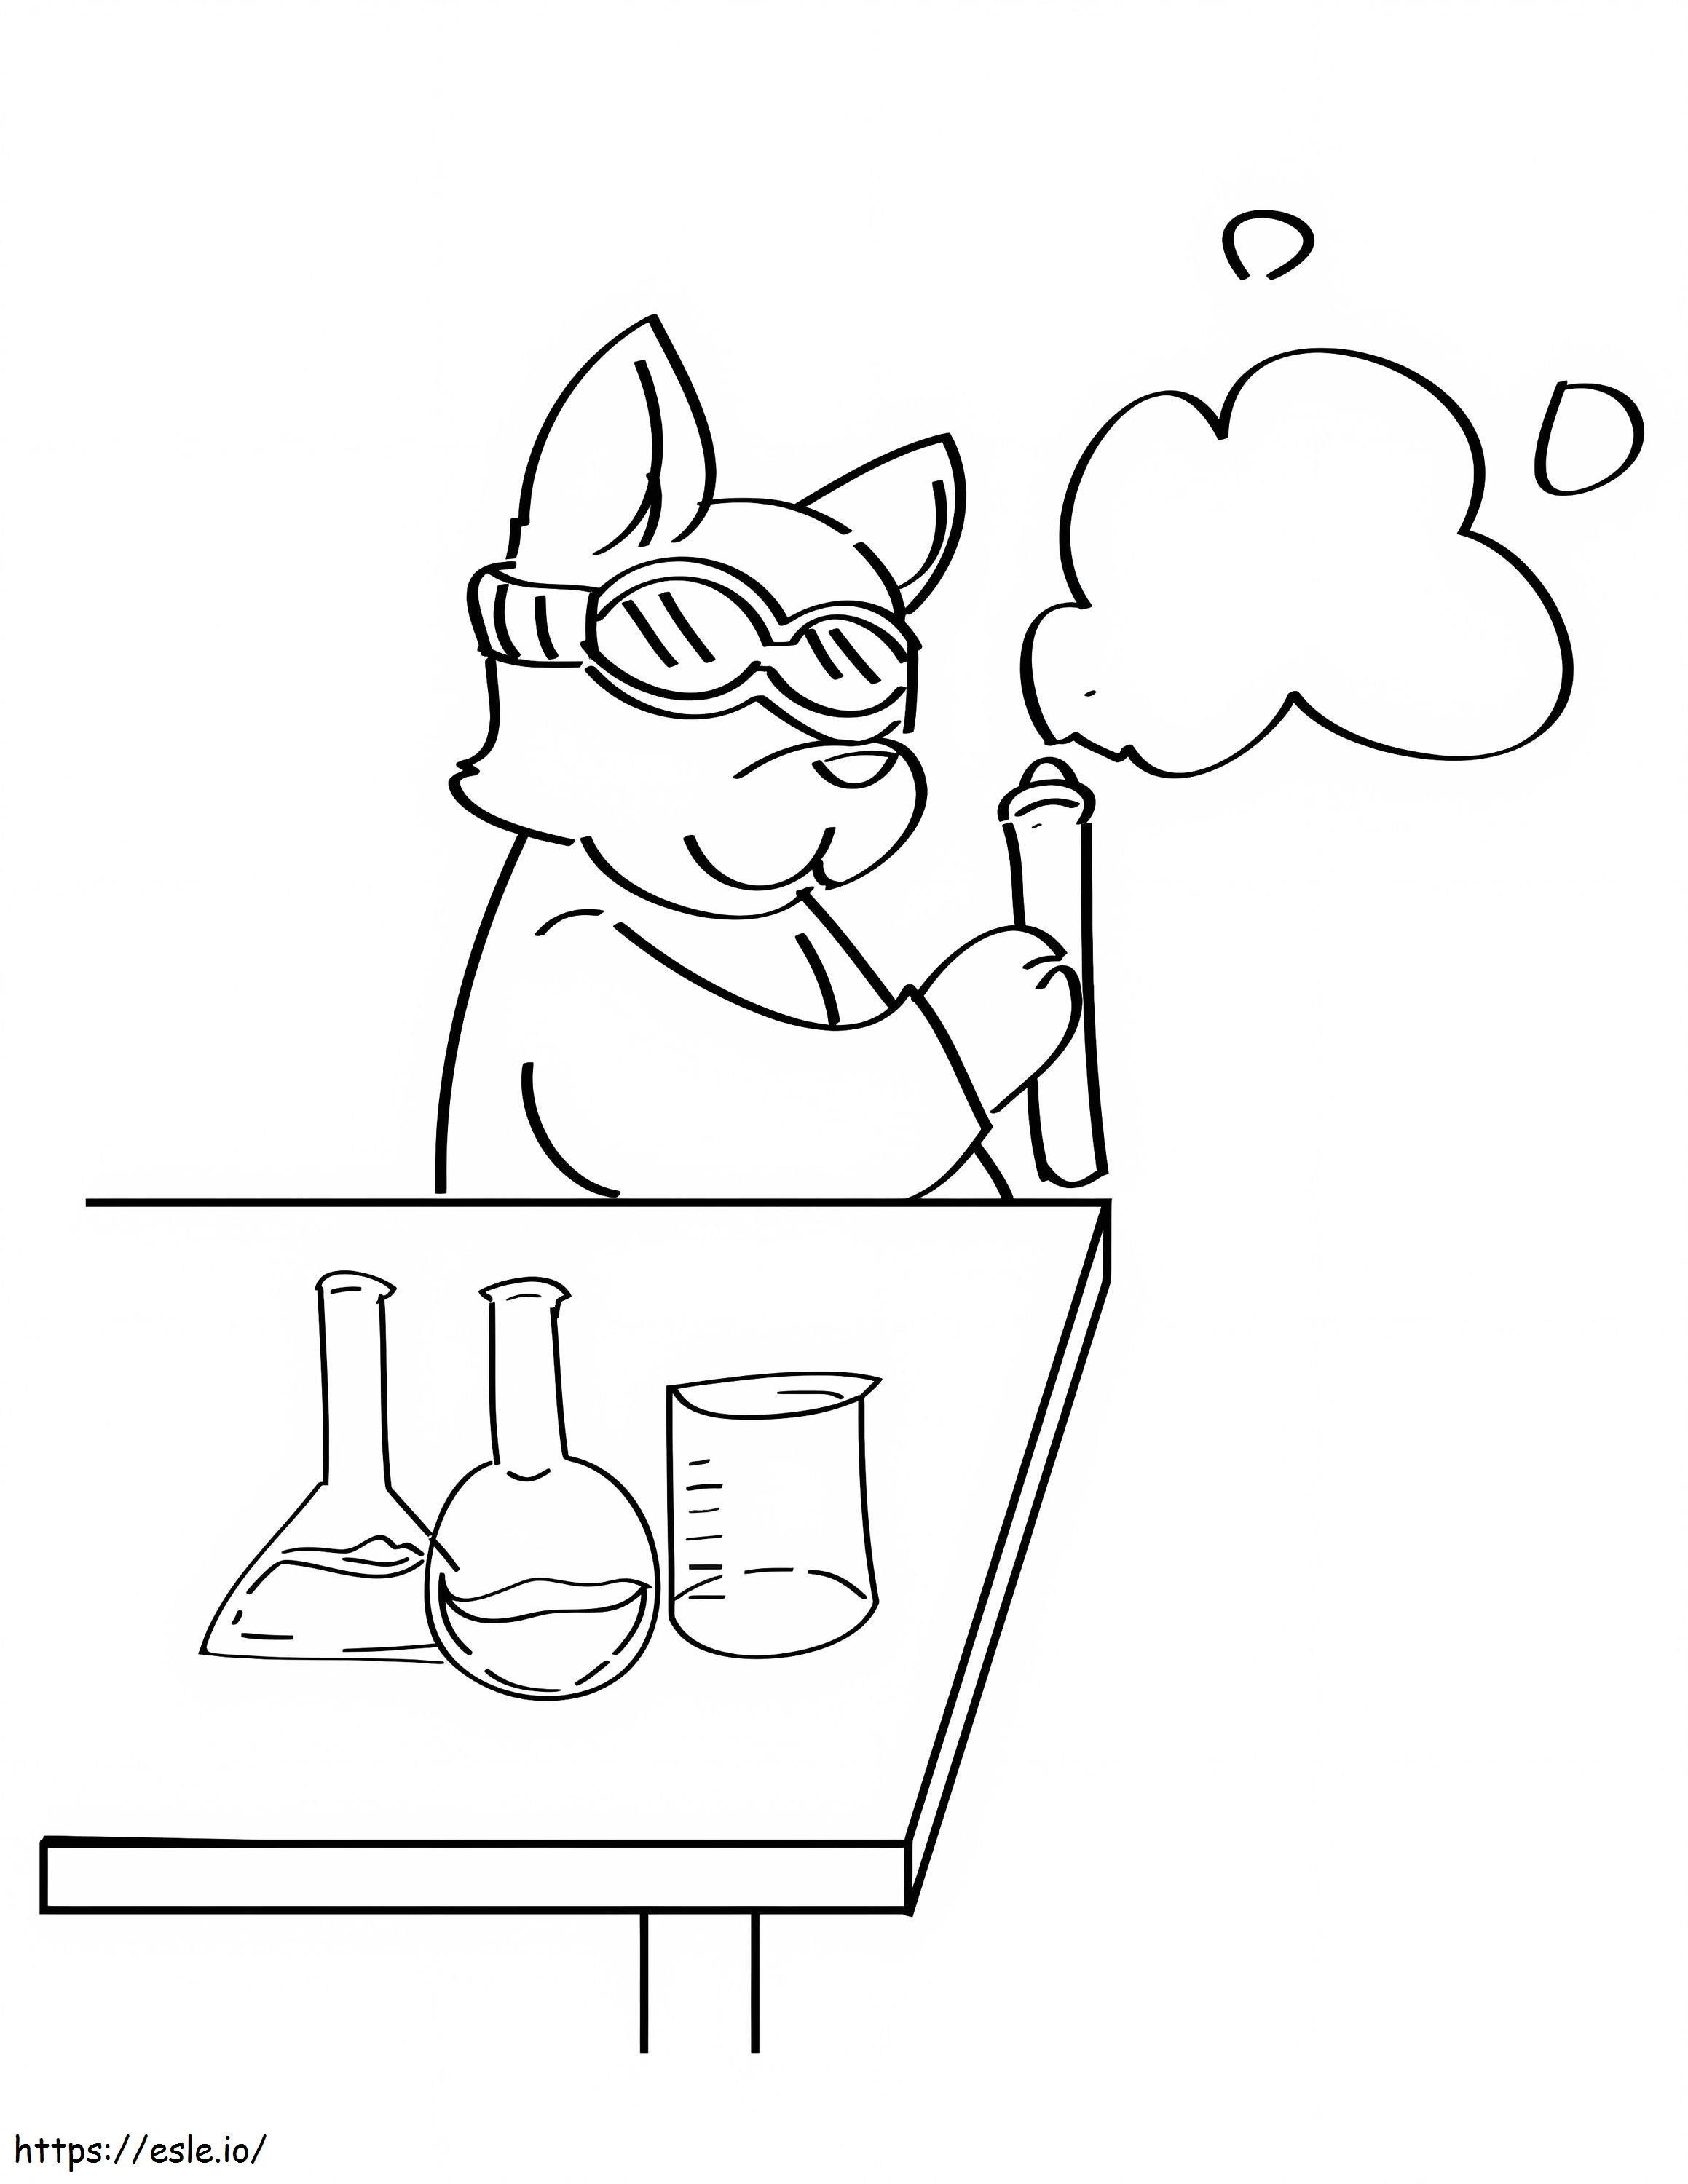 Science Cat coloring page